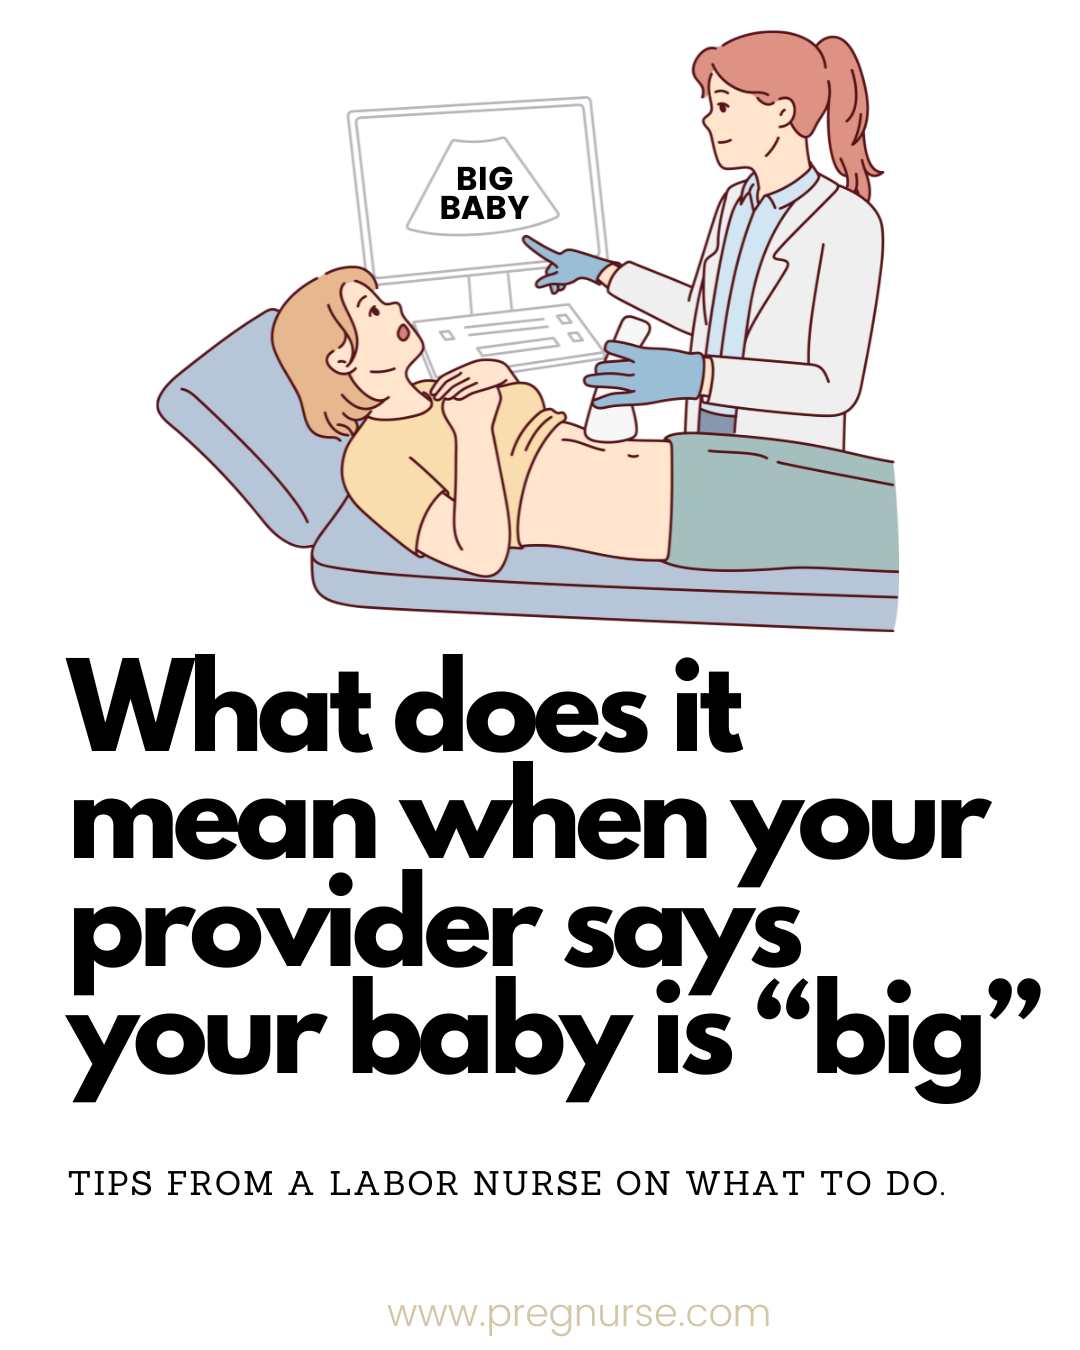 What should you consider when your provider says you have a big baby? What things should you consider for your next steps if baby is LGA, large for gestational age or has macrosomia.